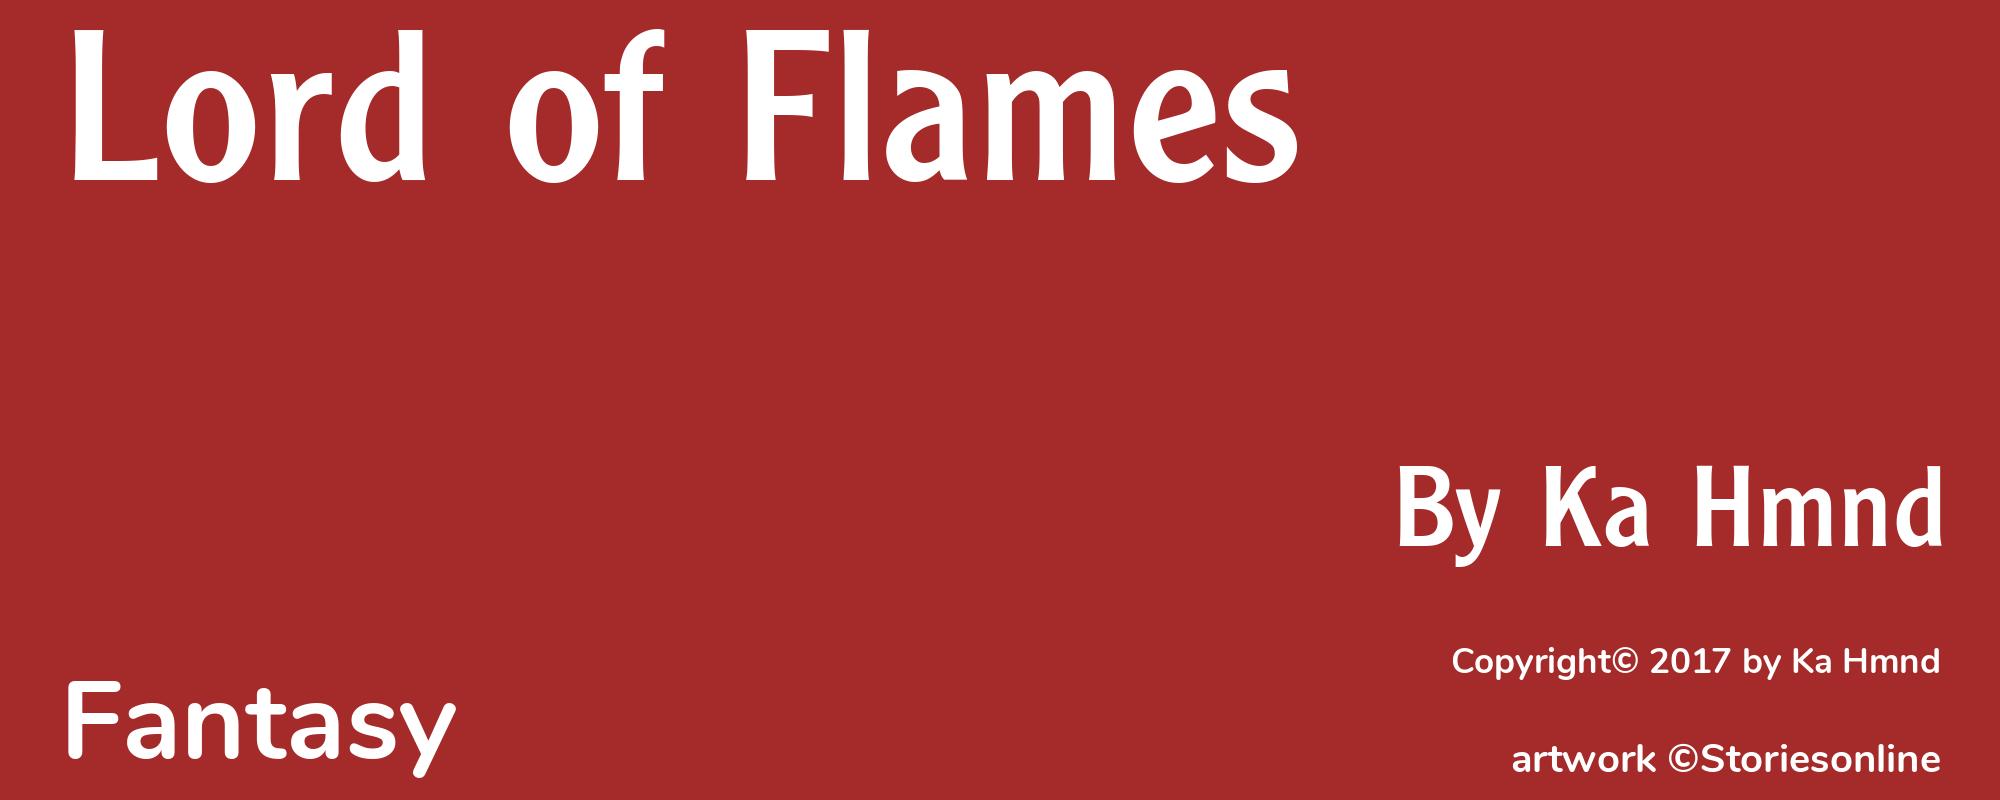 Lord of Flames - Cover